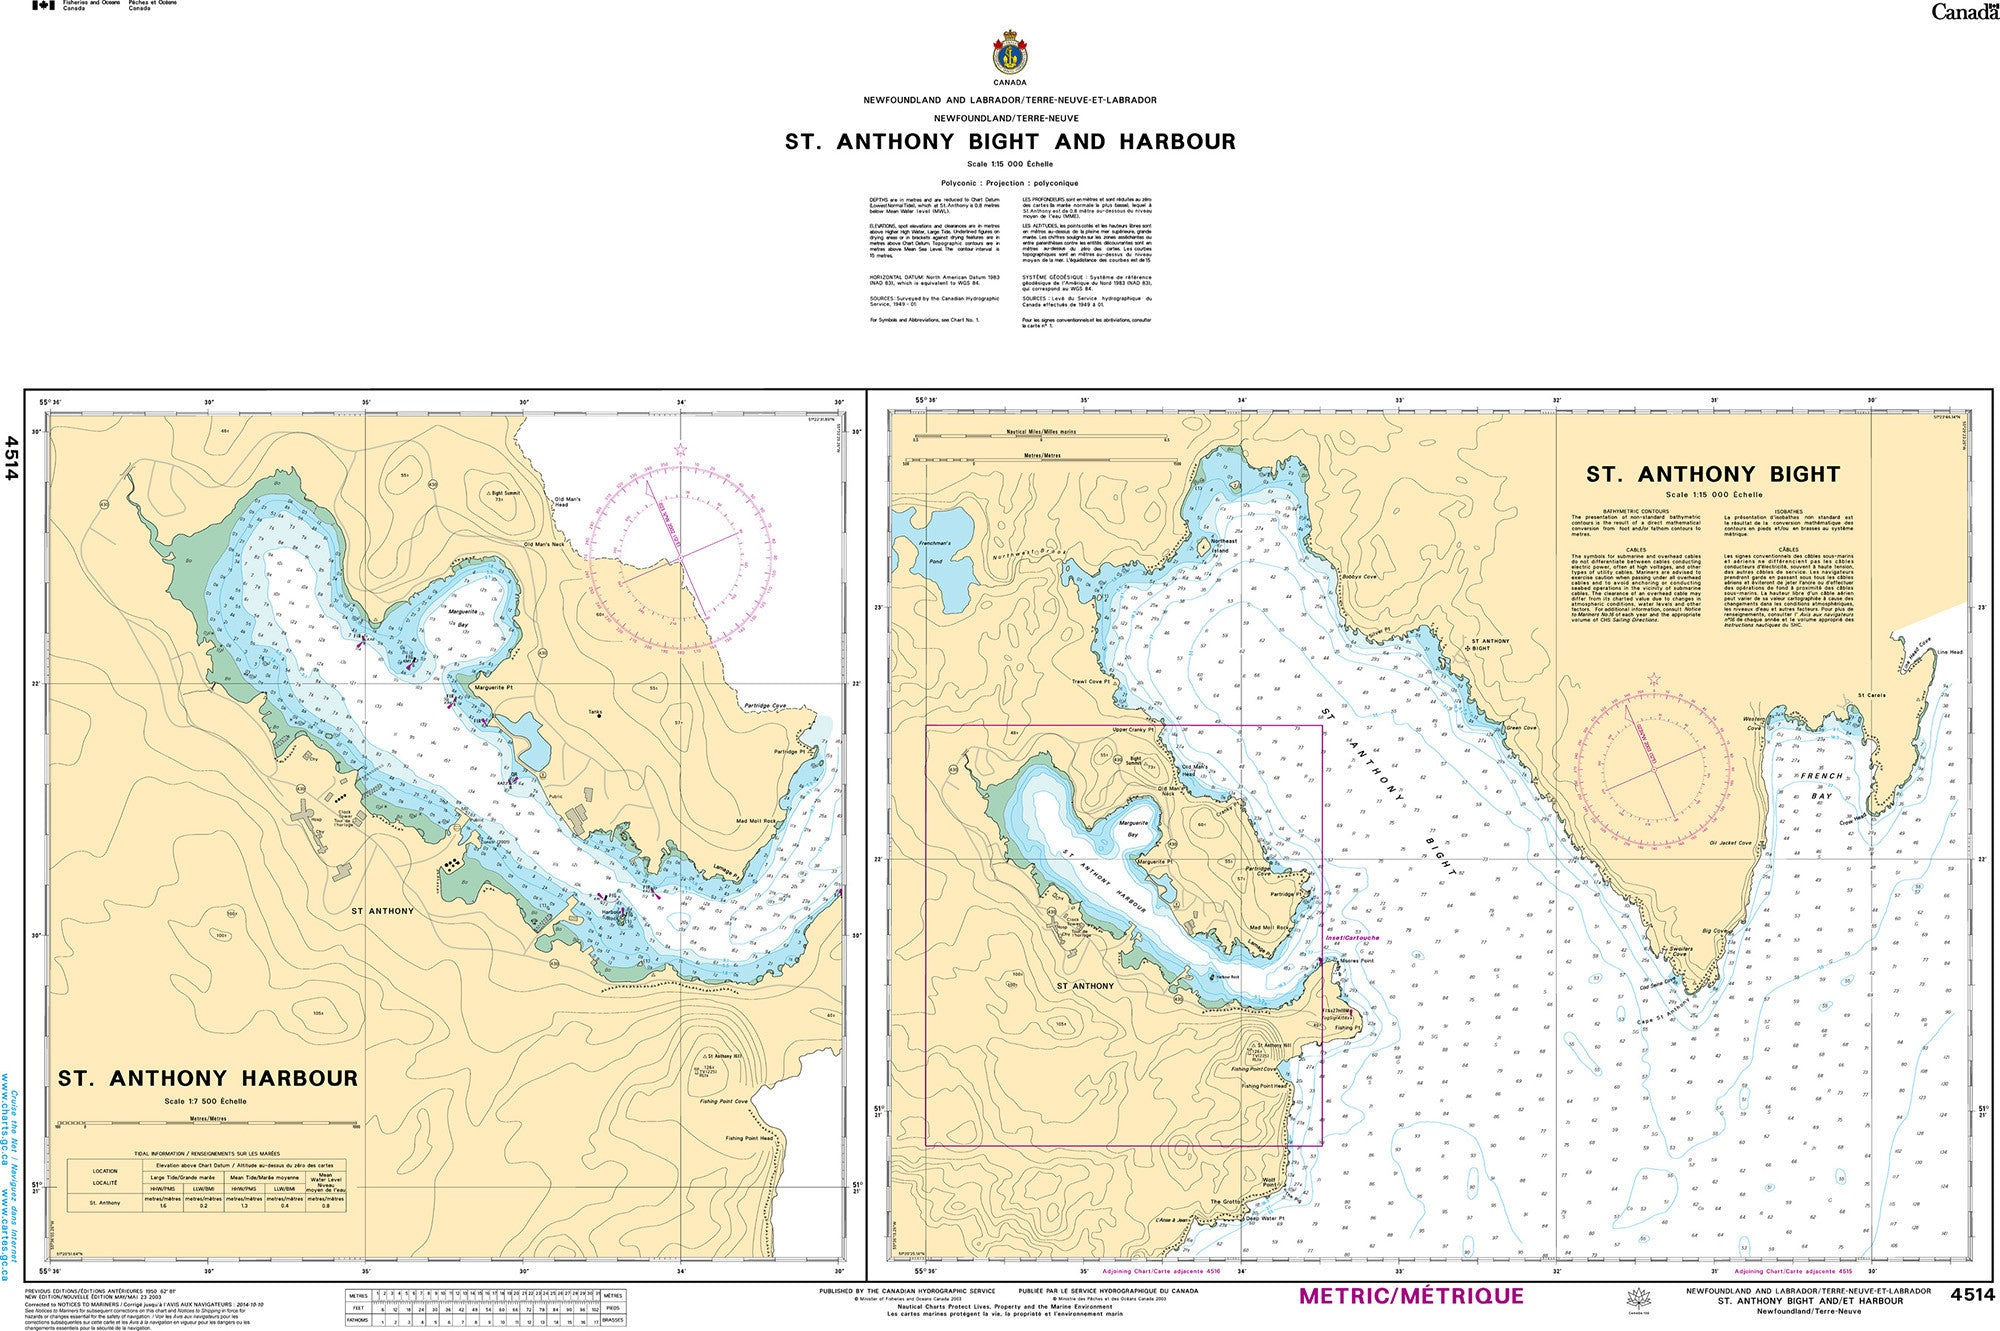 Canadian Hydrographic Service Nautical Chart CHS4514: St. Anthony Bight and Harbour